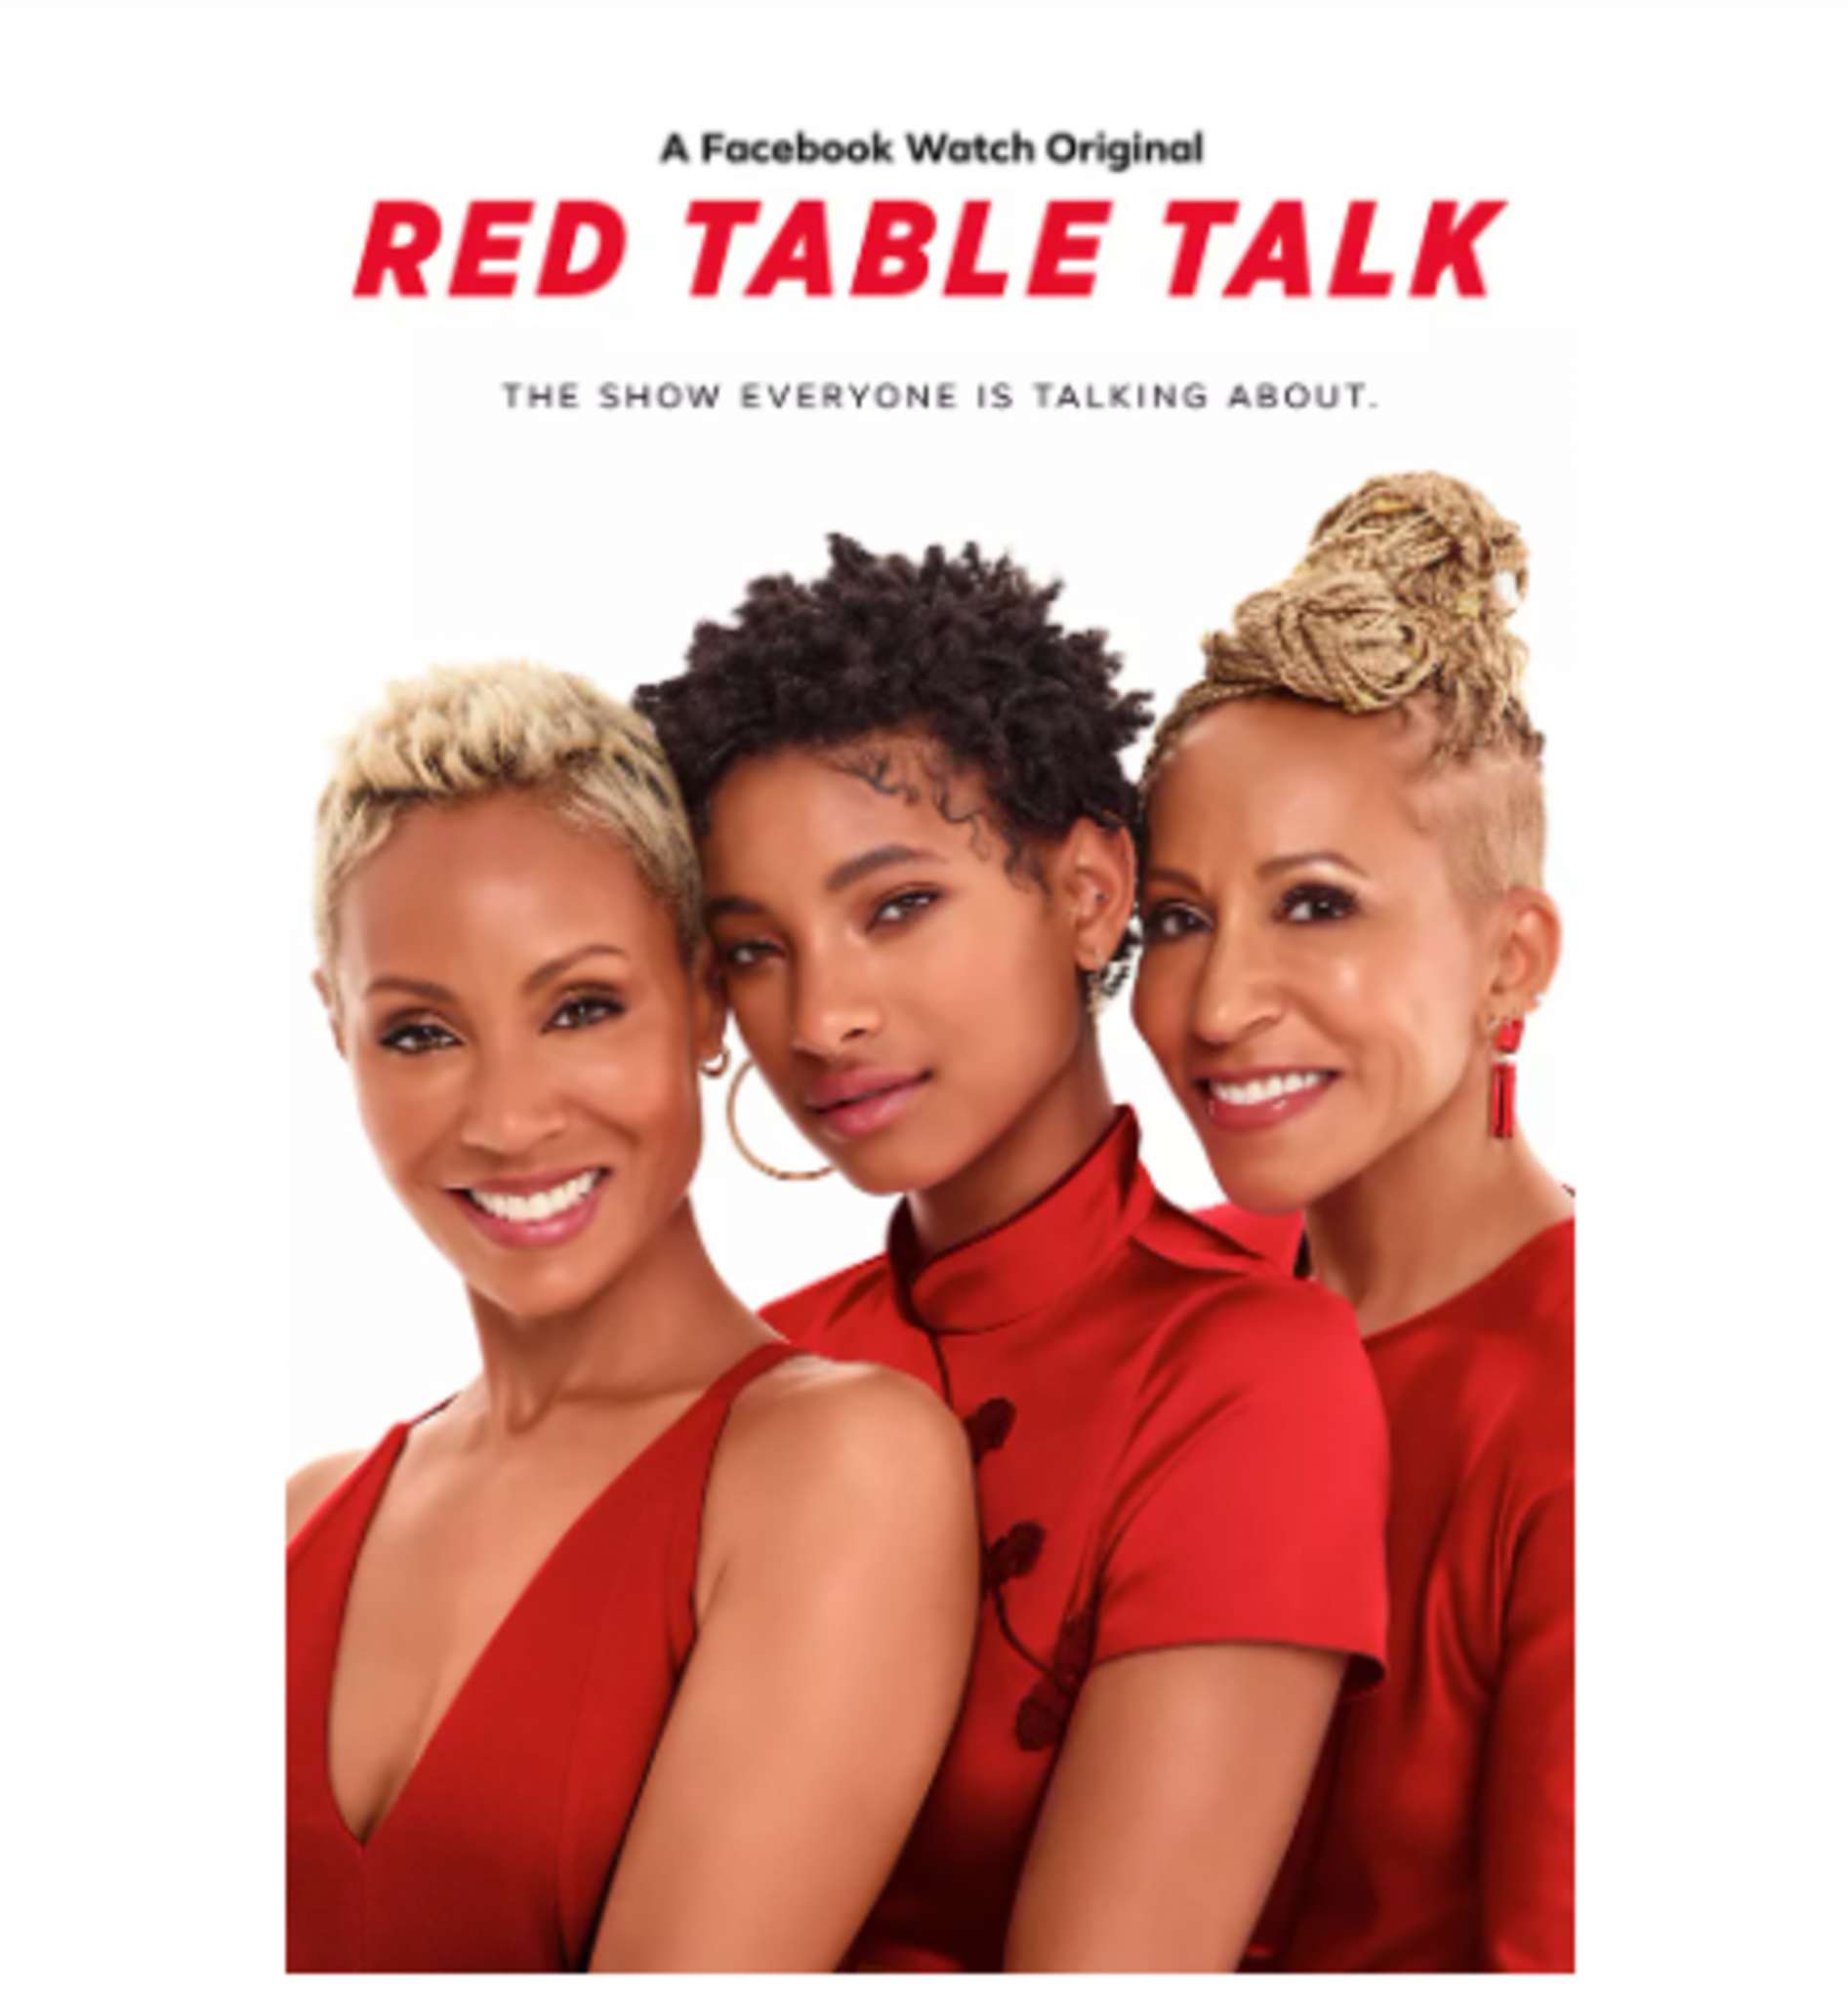 Jennette McCurdy, An Alum Of iCarly, Will Appear In A New Episode Of Red Table Talk When It Returns On Its Scheduled Date